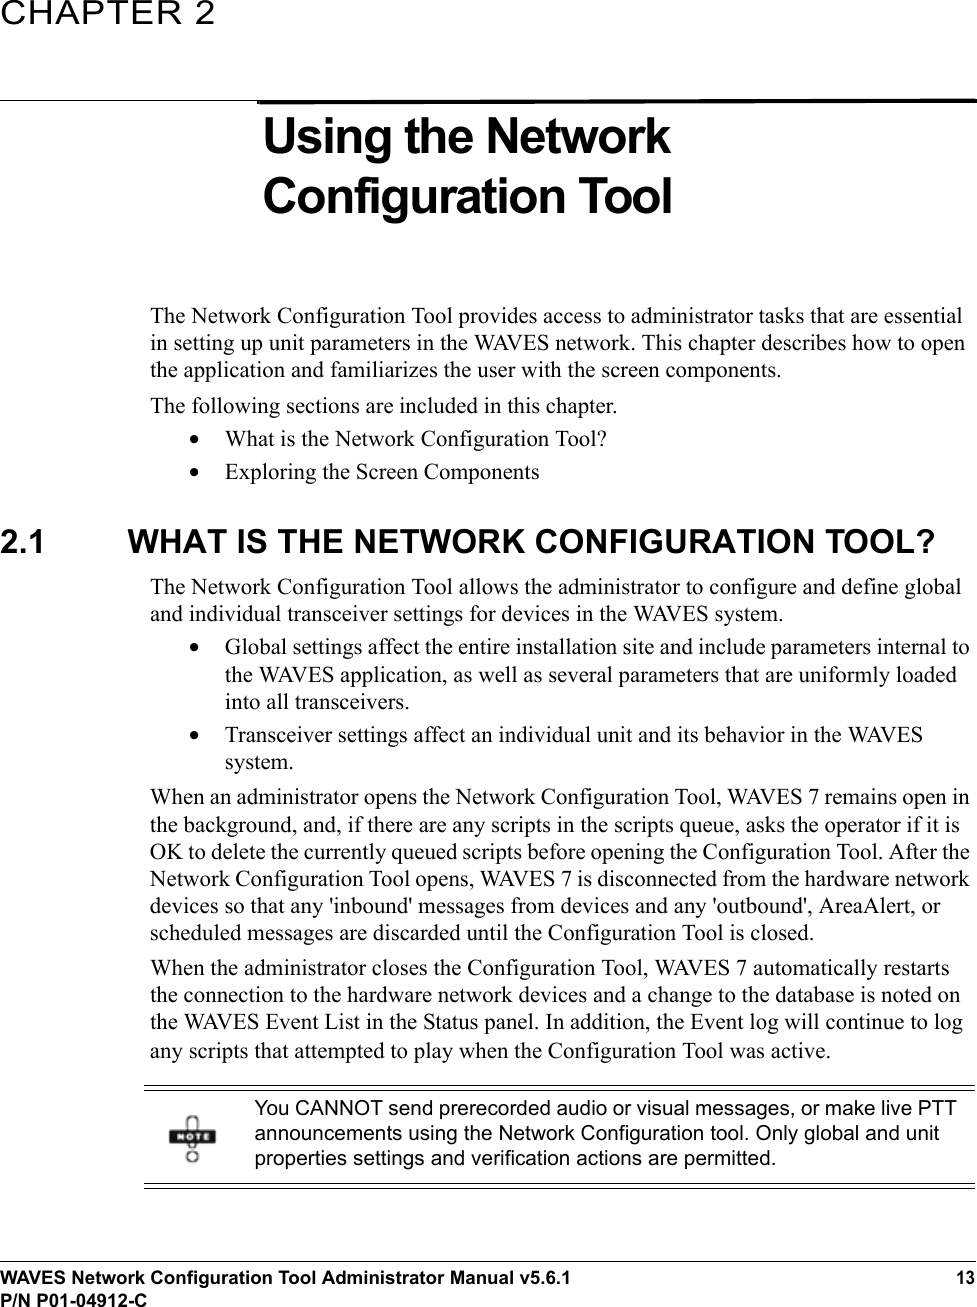 WAVES Network Configuration Tool Administrator Manual v5.6.113P/N P01-04912-CCHAPTER 2Using the Network Configuration Tool The Network Configuration Tool provides access to administrator tasks that are essential in setting up unit parameters in the WAVES network. This chapter describes how to open the application and familiarizes the user with the screen components.The following sections are included in this chapter.•What is the Network Configuration Tool?•Exploring the Screen Components2.1 WHAT IS THE NETWORK CONFIGURATION TOOL?The Network Configuration Tool allows the administrator to configure and define global and individual transceiver settings for devices in the WAVES system. •Global settings affect the entire installation site and include parameters internal to the WAVES application, as well as several parameters that are uniformly loaded into all transceivers. •Transceiver settings affect an individual unit and its behavior in the WAVES system. When an administrator opens the Network Configuration Tool, WAVES 7 remains open in the background, and, if there are any scripts in the scripts queue, asks the operator if it is OK to delete the currently queued scripts before opening the Configuration Tool. After the Network Configuration Tool opens, WAVES 7 is disconnected from the hardware network devices so that any &apos;inbound&apos; messages from devices and any &apos;outbound&apos;, AreaAlert, or scheduled messages are discarded until the Configuration Tool is closed.When the administrator closes the Configuration Tool, WAVES 7 automatically restarts the connection to the hardware network devices and a change to the database is noted on the WAVES Event List in the Status panel. In addition, the Event log will continue to log any scripts that attempted to play when the Configuration Tool was active.You CANNOT send prerecorded audio or visual messages, or make live PTT announcements using the Network Configuration tool. Only global and unit properties settings and verification actions are permitted.